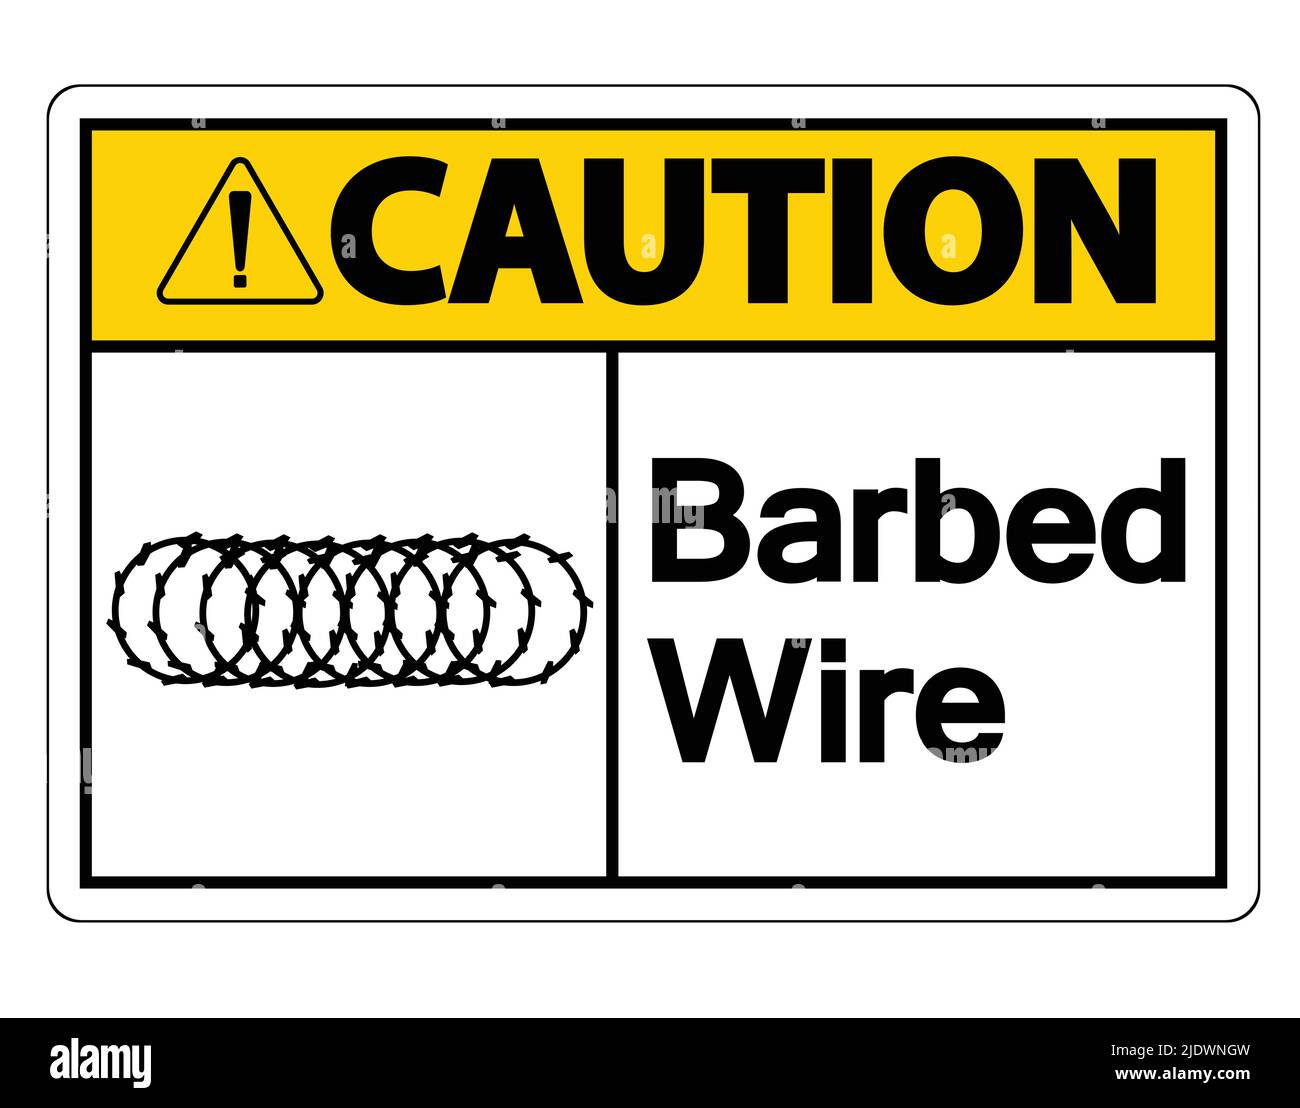 Caution Barbed Wire Symbol Sign On White Background,Vector illustration Stock Vector